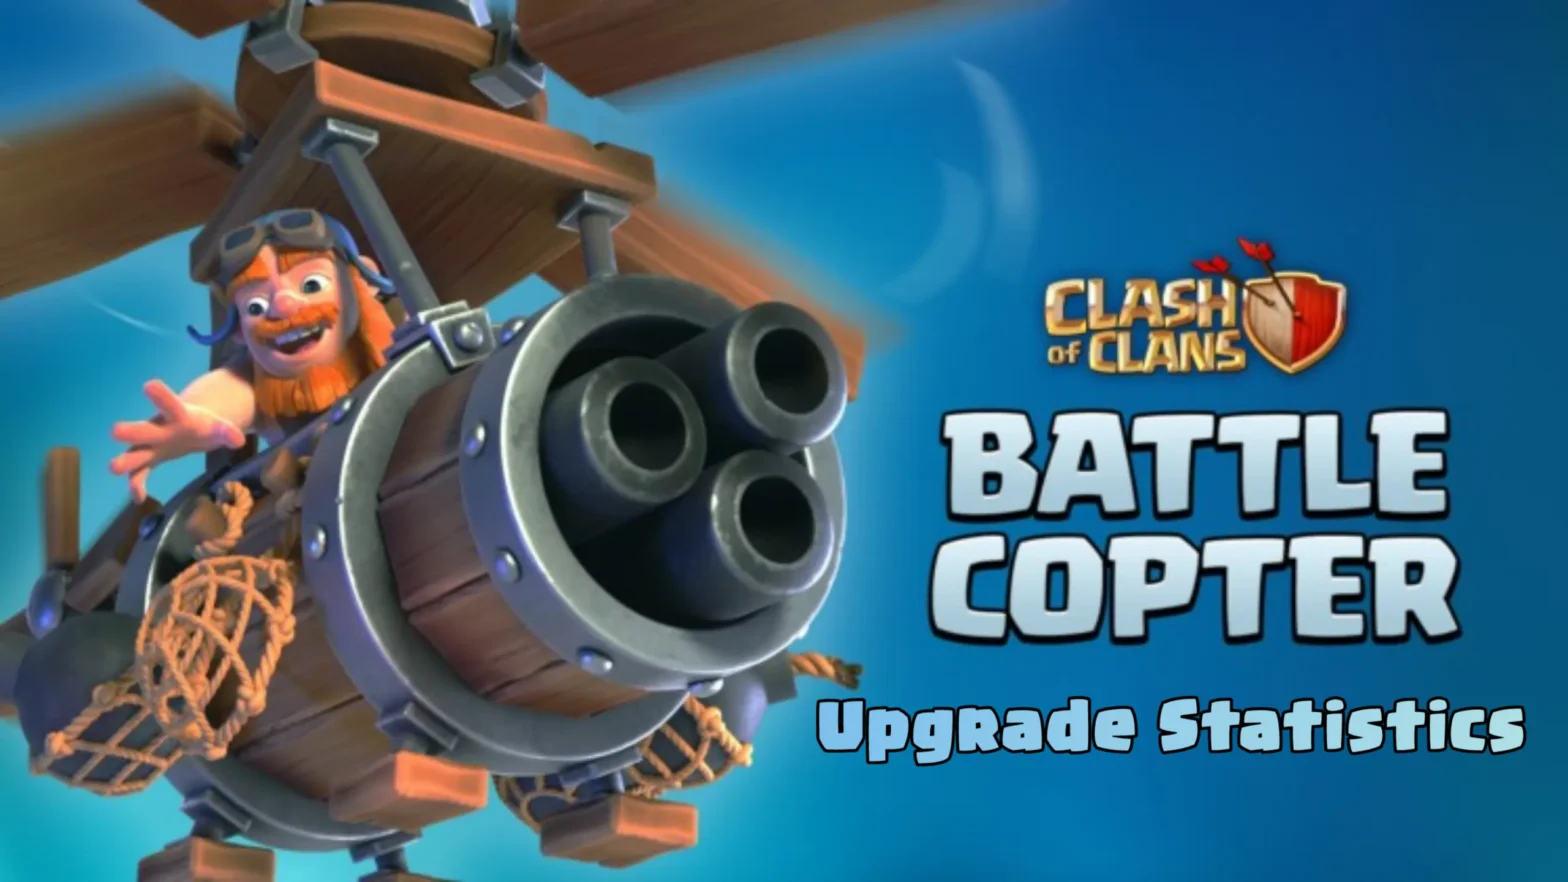 Clash of Clans: Battle Copter Upgrade Cost and Upgrade Time